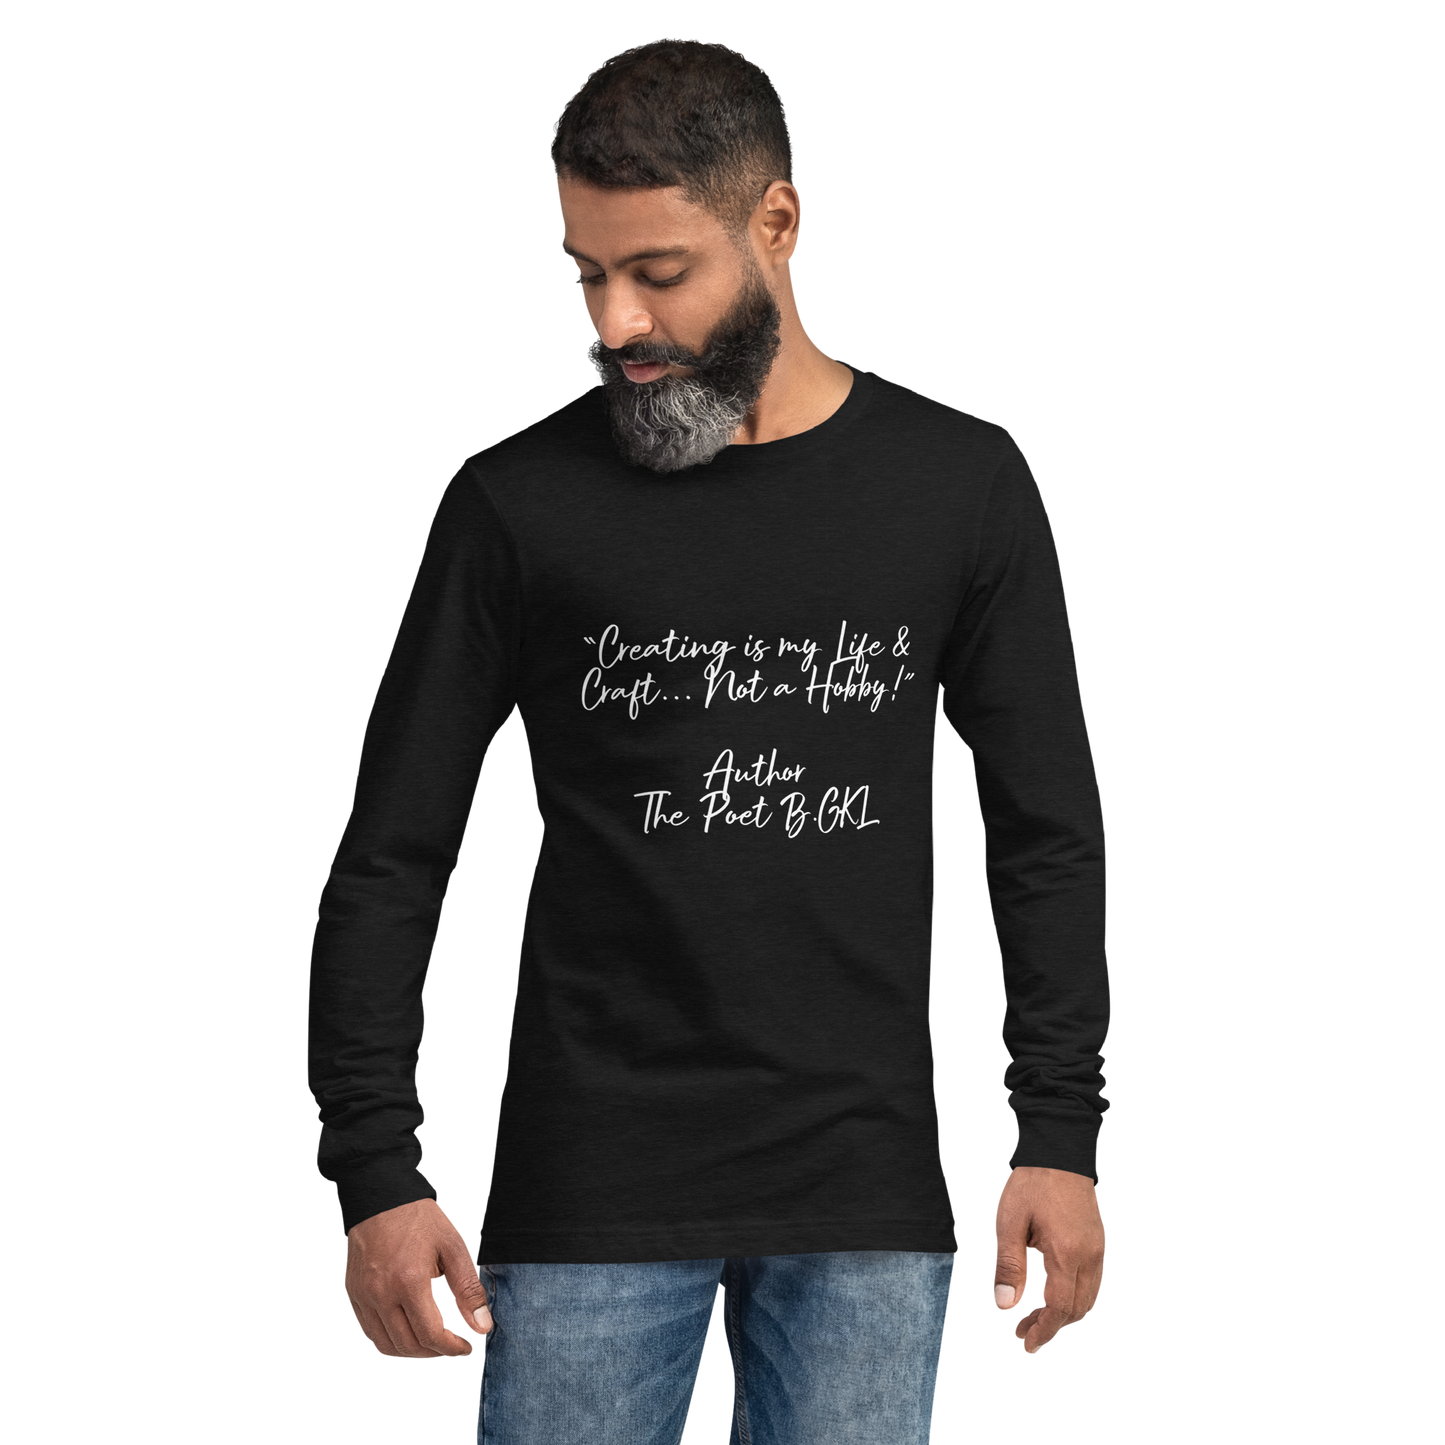 “Creating is my Life & Craft... Not a Hobby!” Author The Poet B.GKL-Unisex Long Sleeve Tee